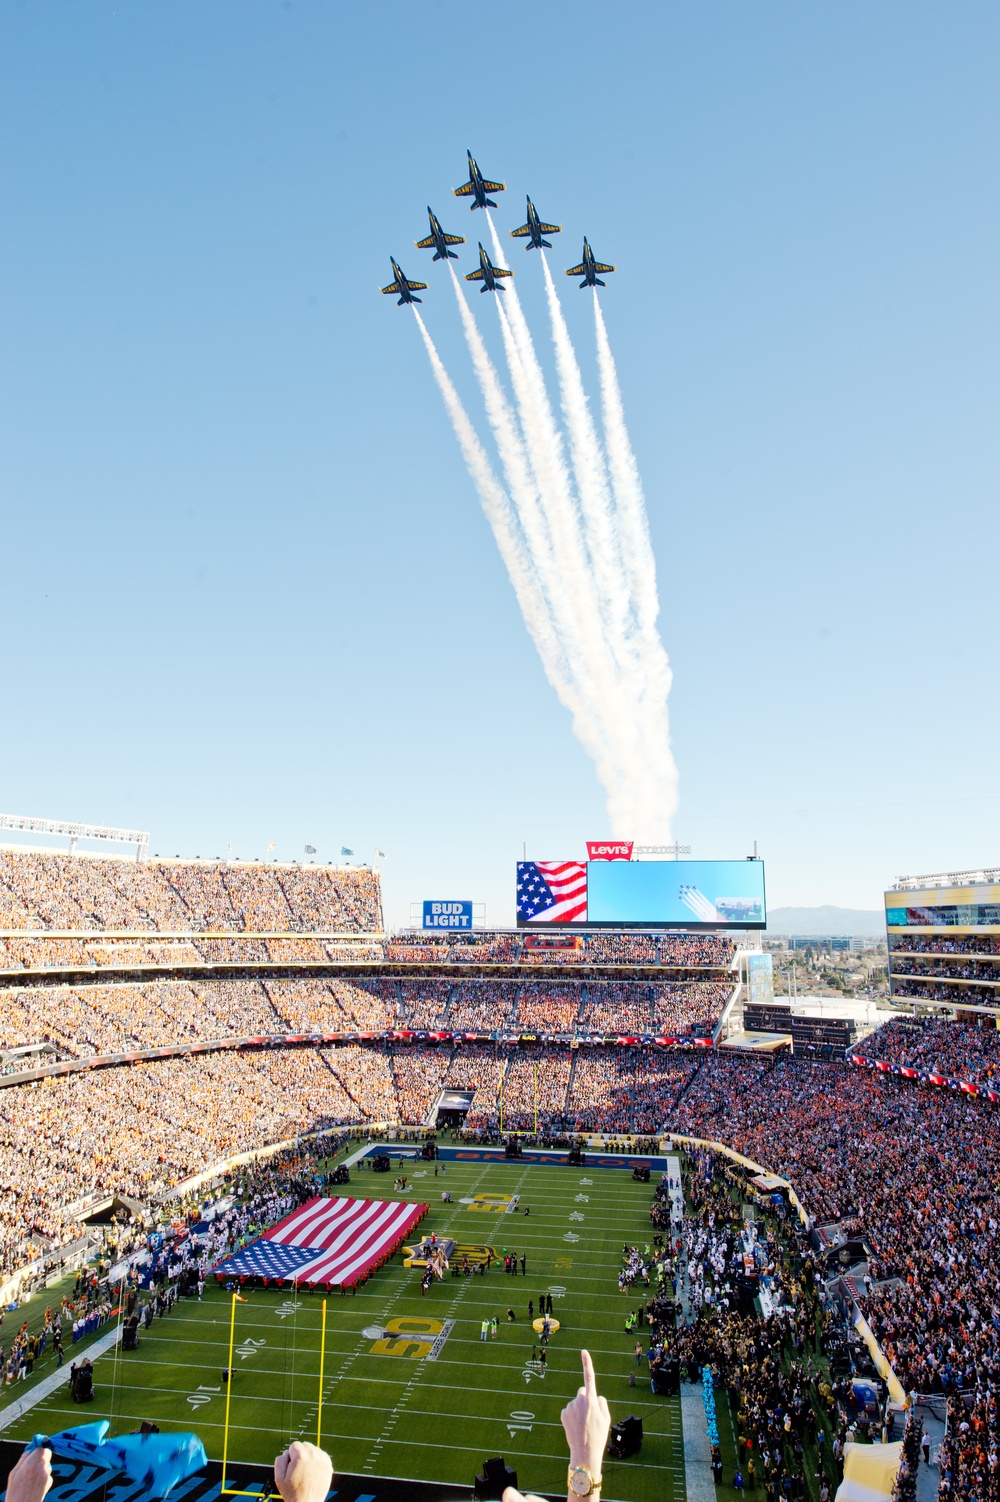 Formation over the 2016 Super Bowl